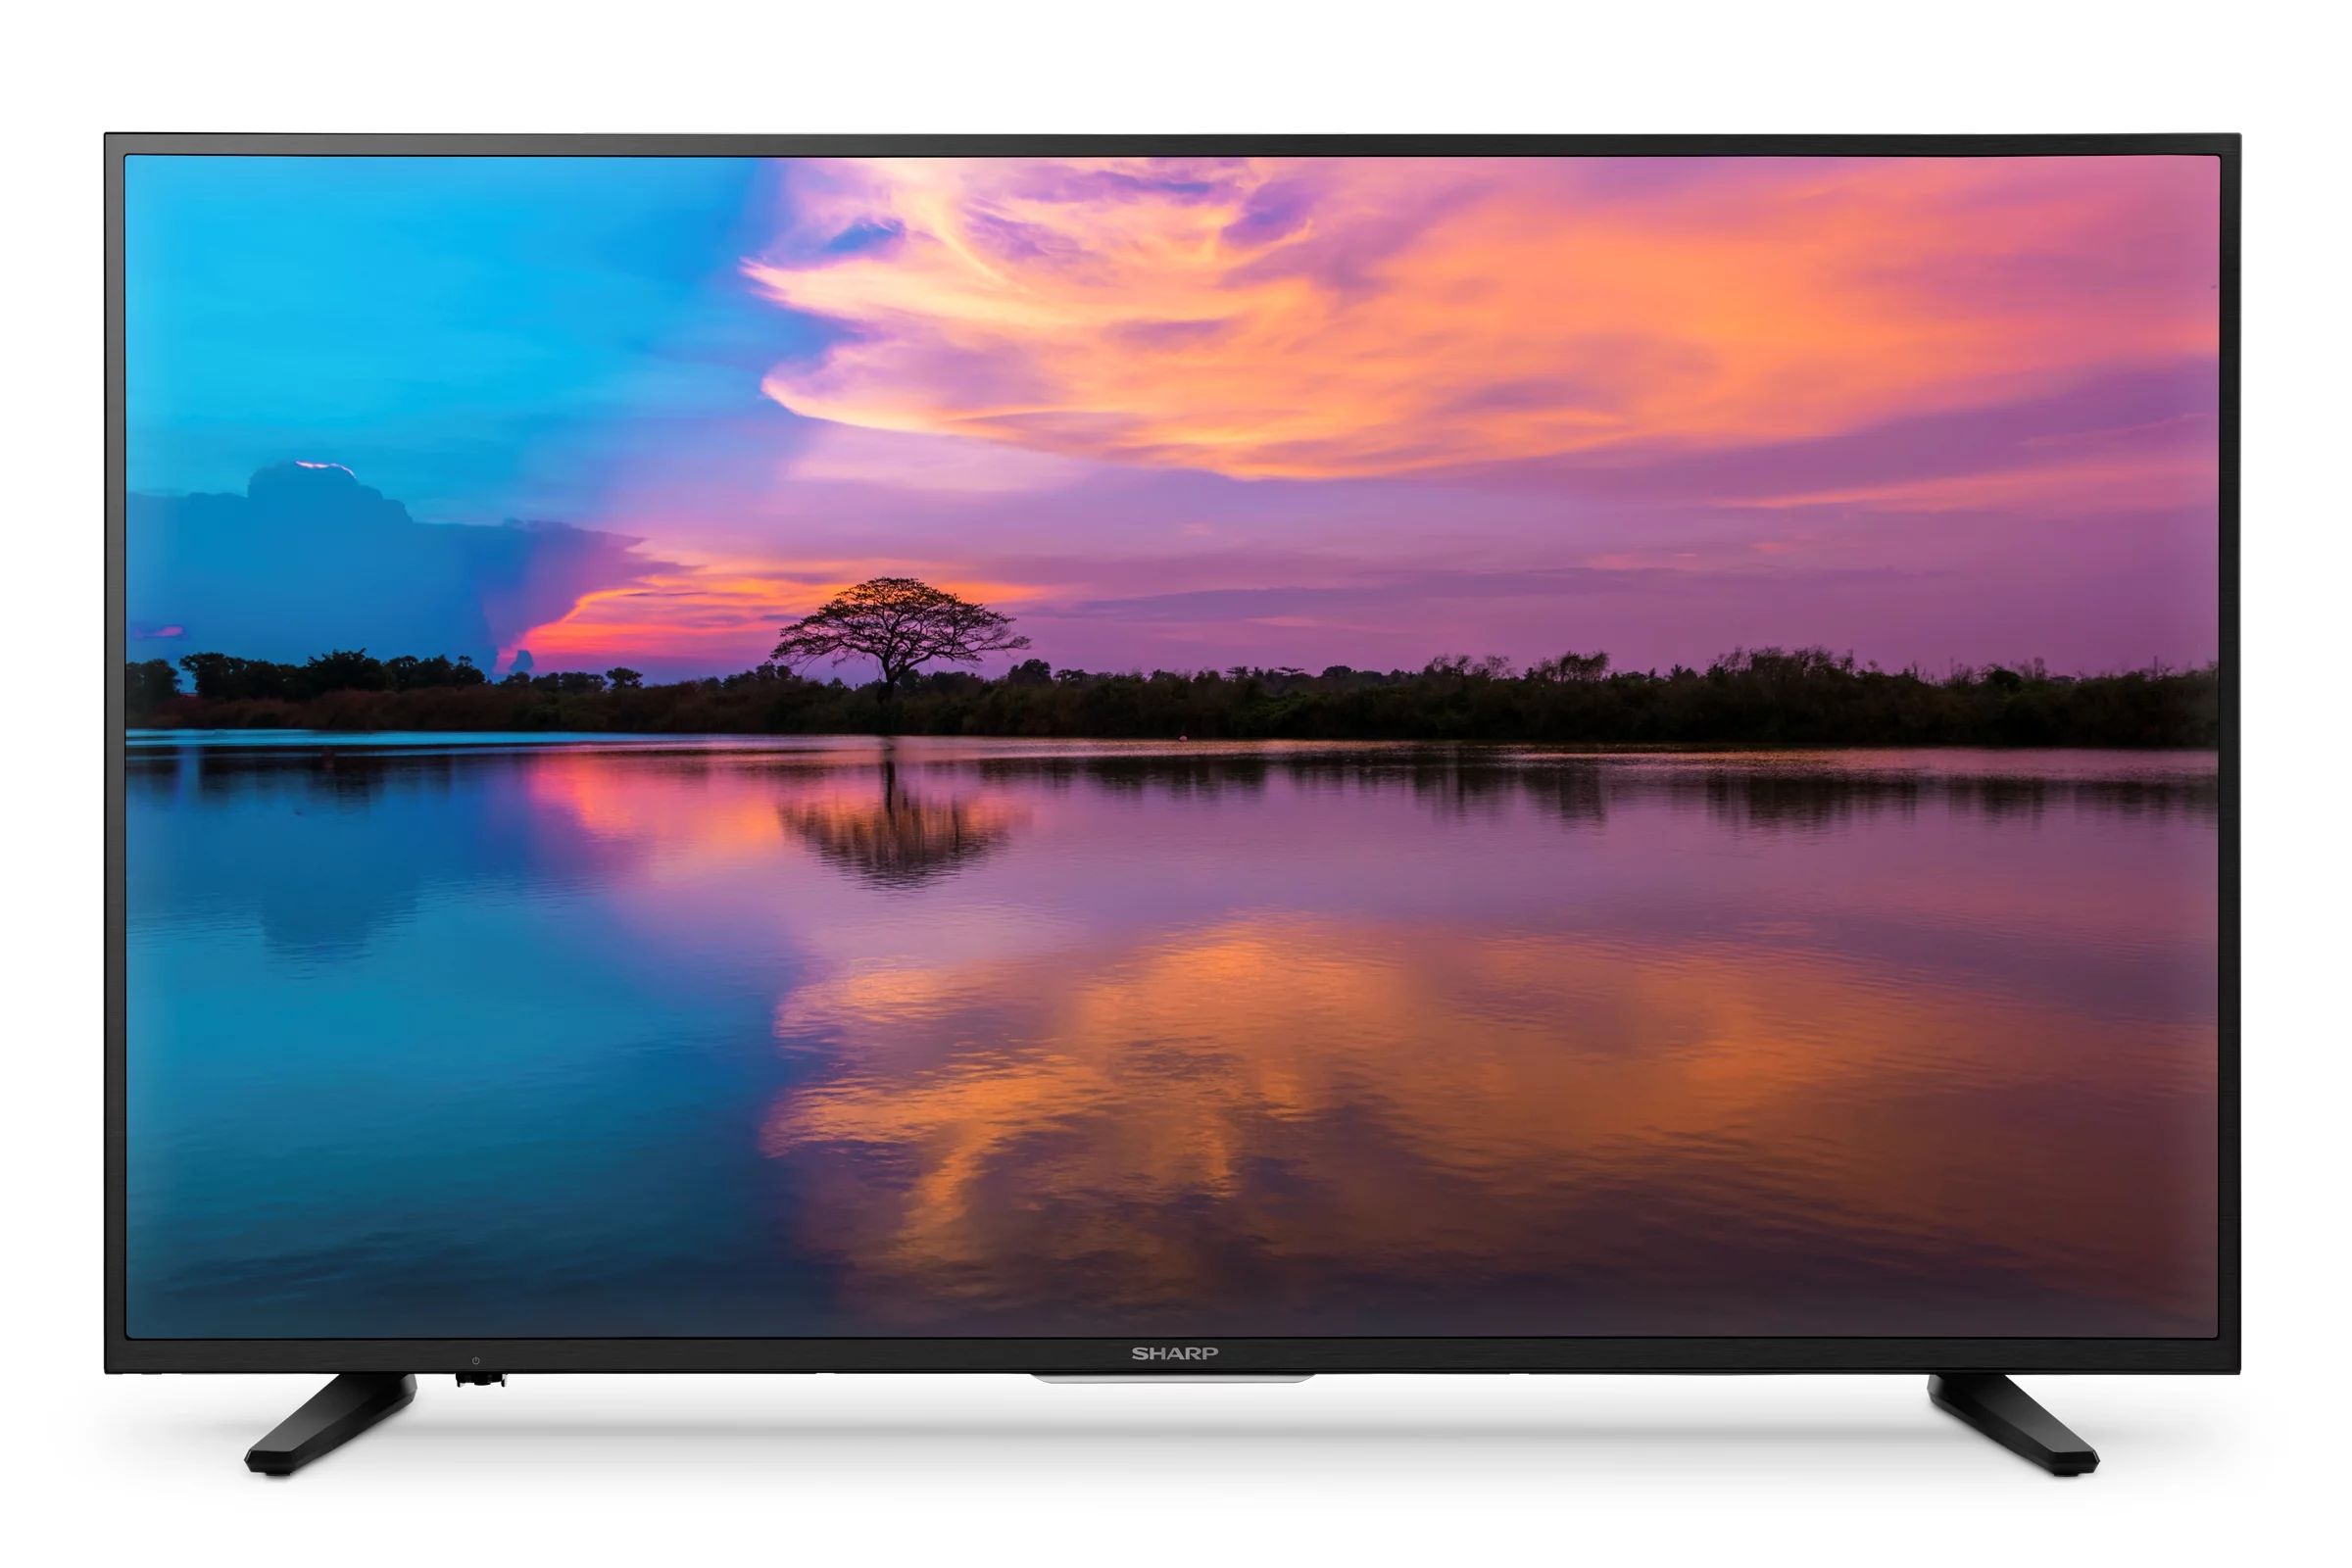 What Is The Dimension Of The Box That Holds Sharp 55 Class 4K (2160P) Smart LED TV (LC-55N7000U)